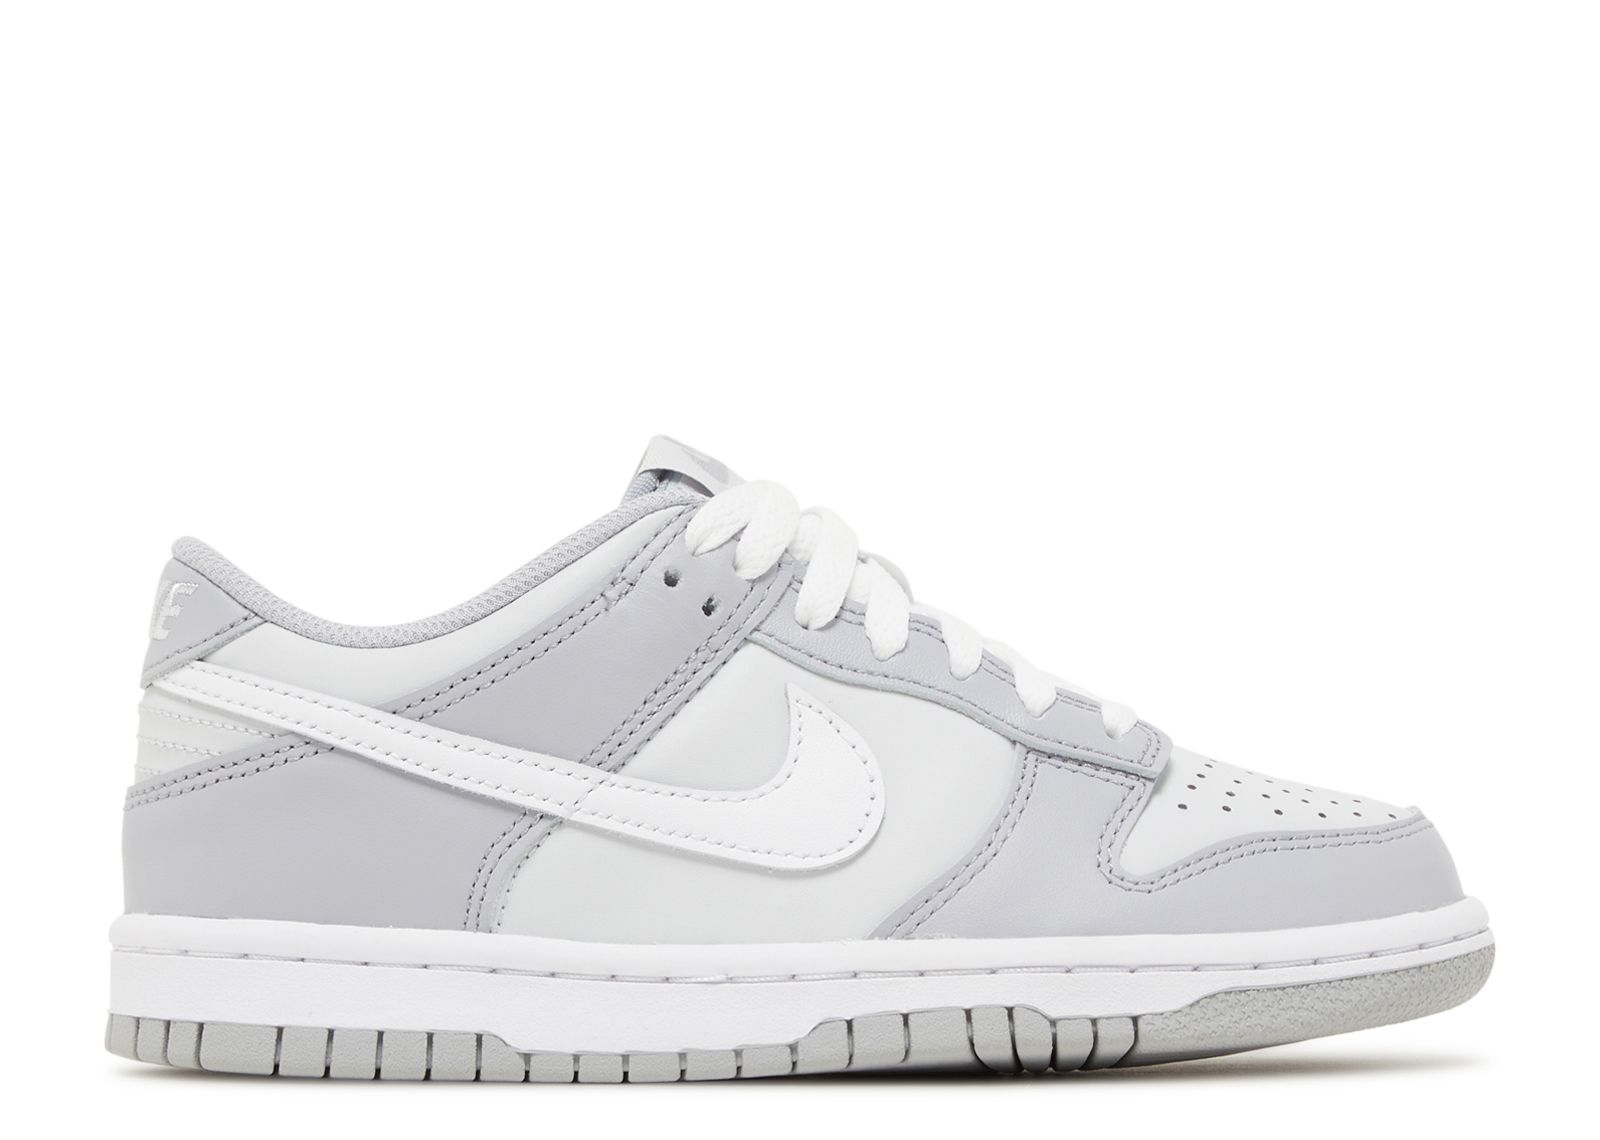 Кроссовки Nike Dunk Low Ps 'Wolf Grey', серый 2090 running shoes mens trainers womens chaussures wolf grey black grape pure platinum triple white designer sneakers sports